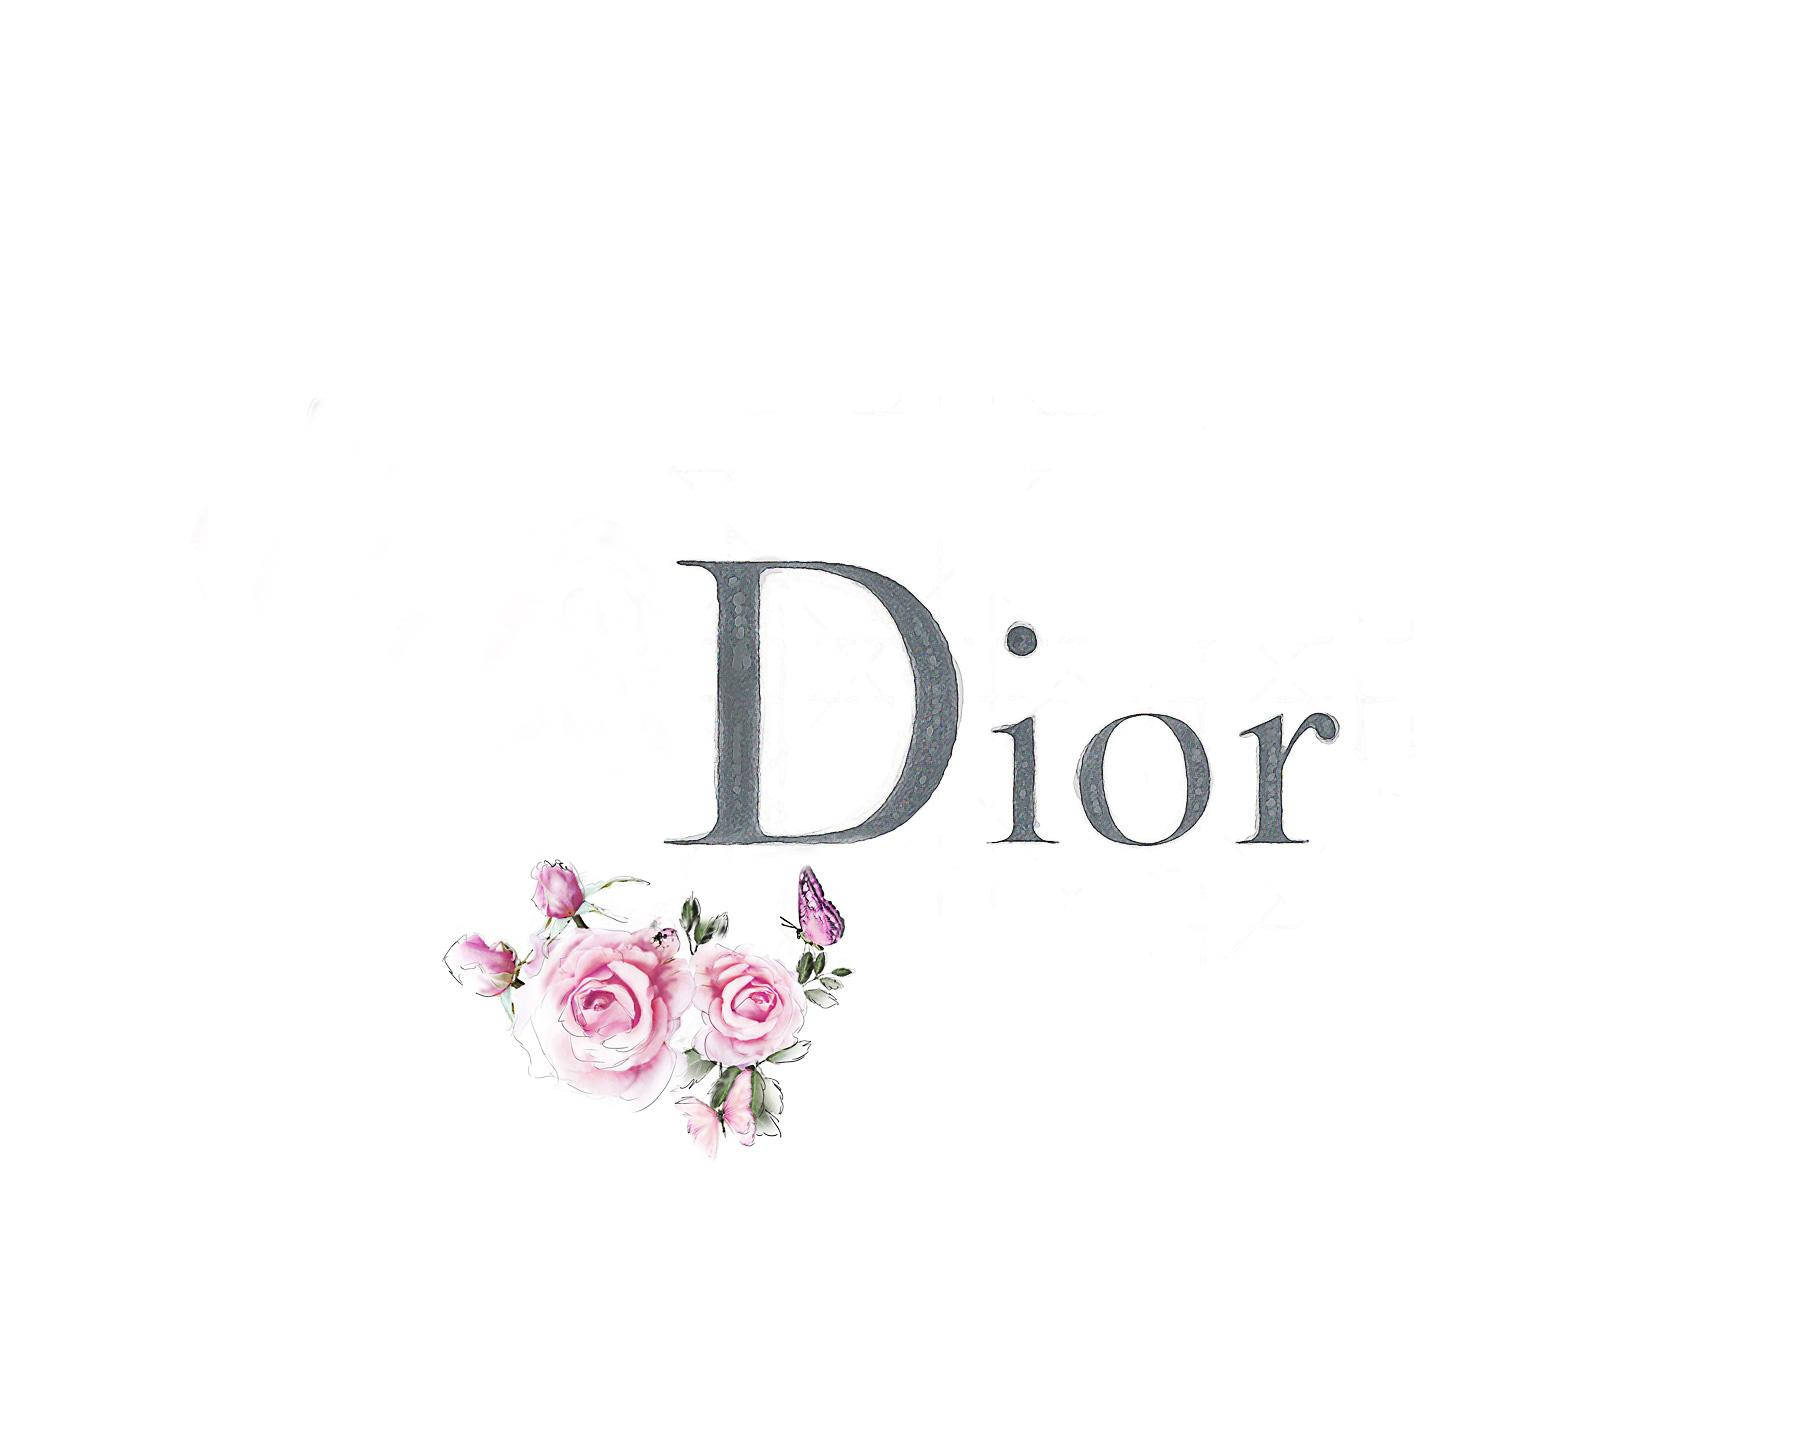 Dior Logo With Flowers